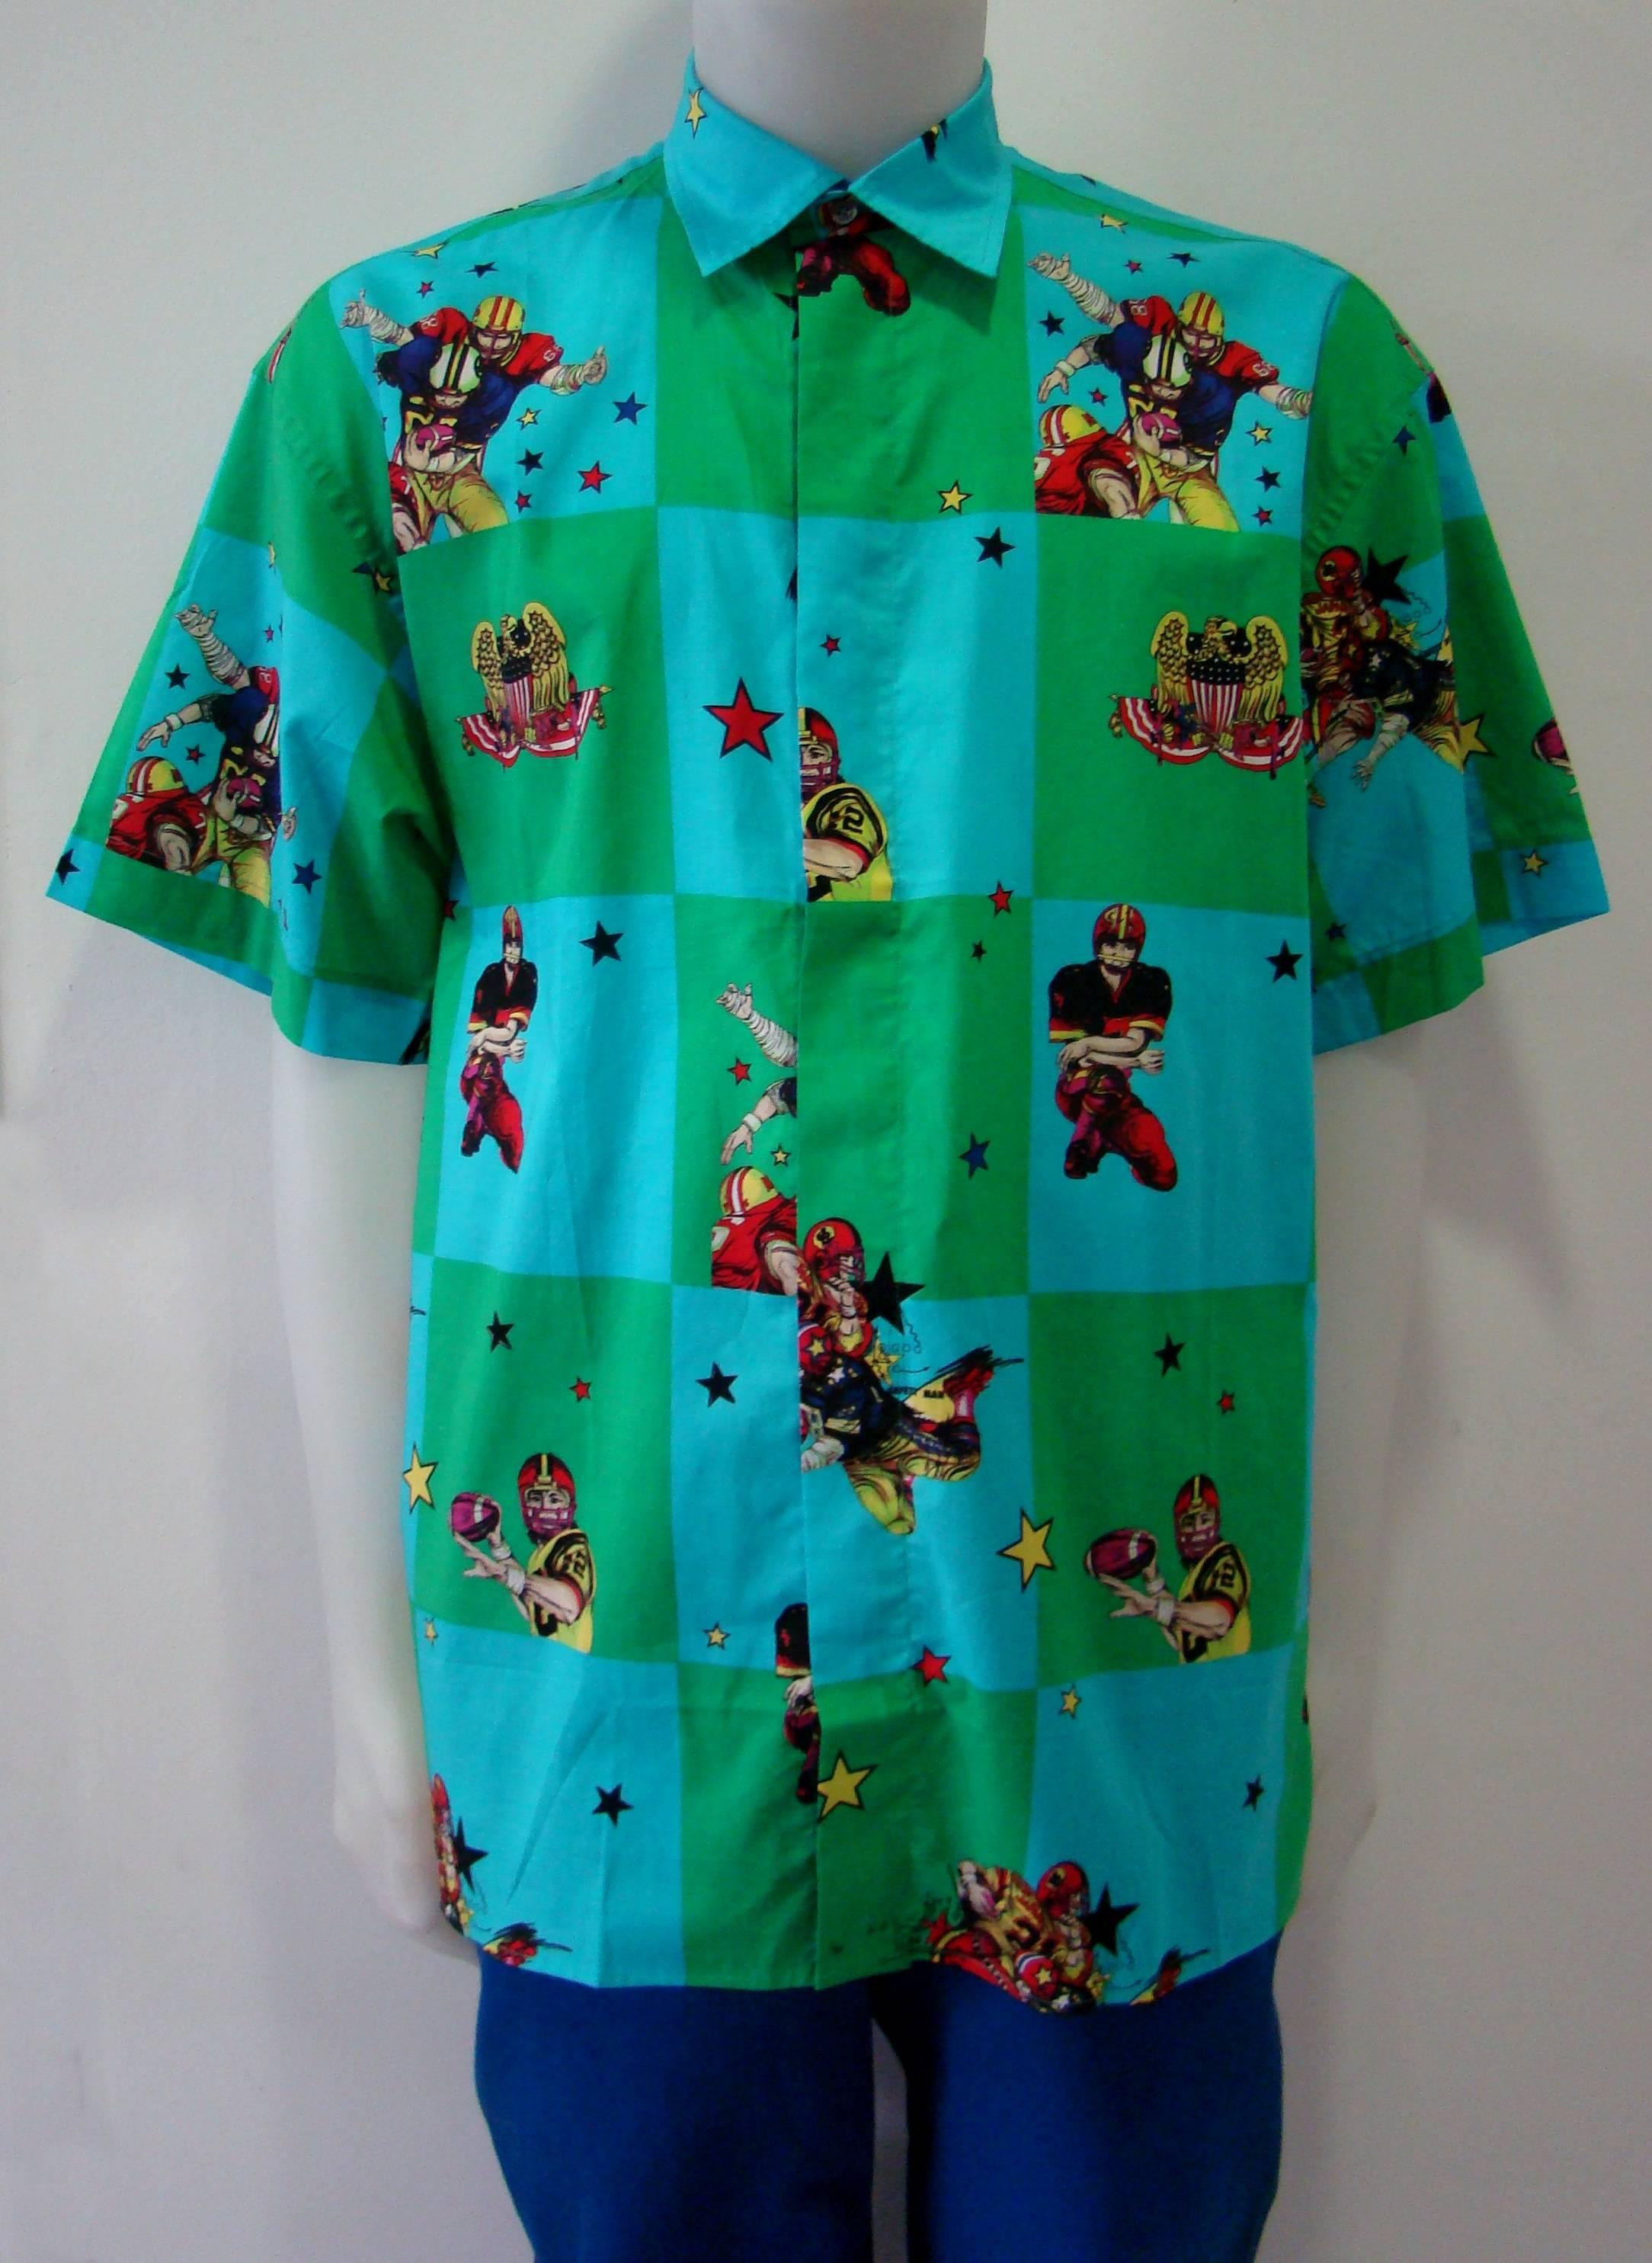 Blue Gianni Versace Men's Printed Shirt 1990s For Sale